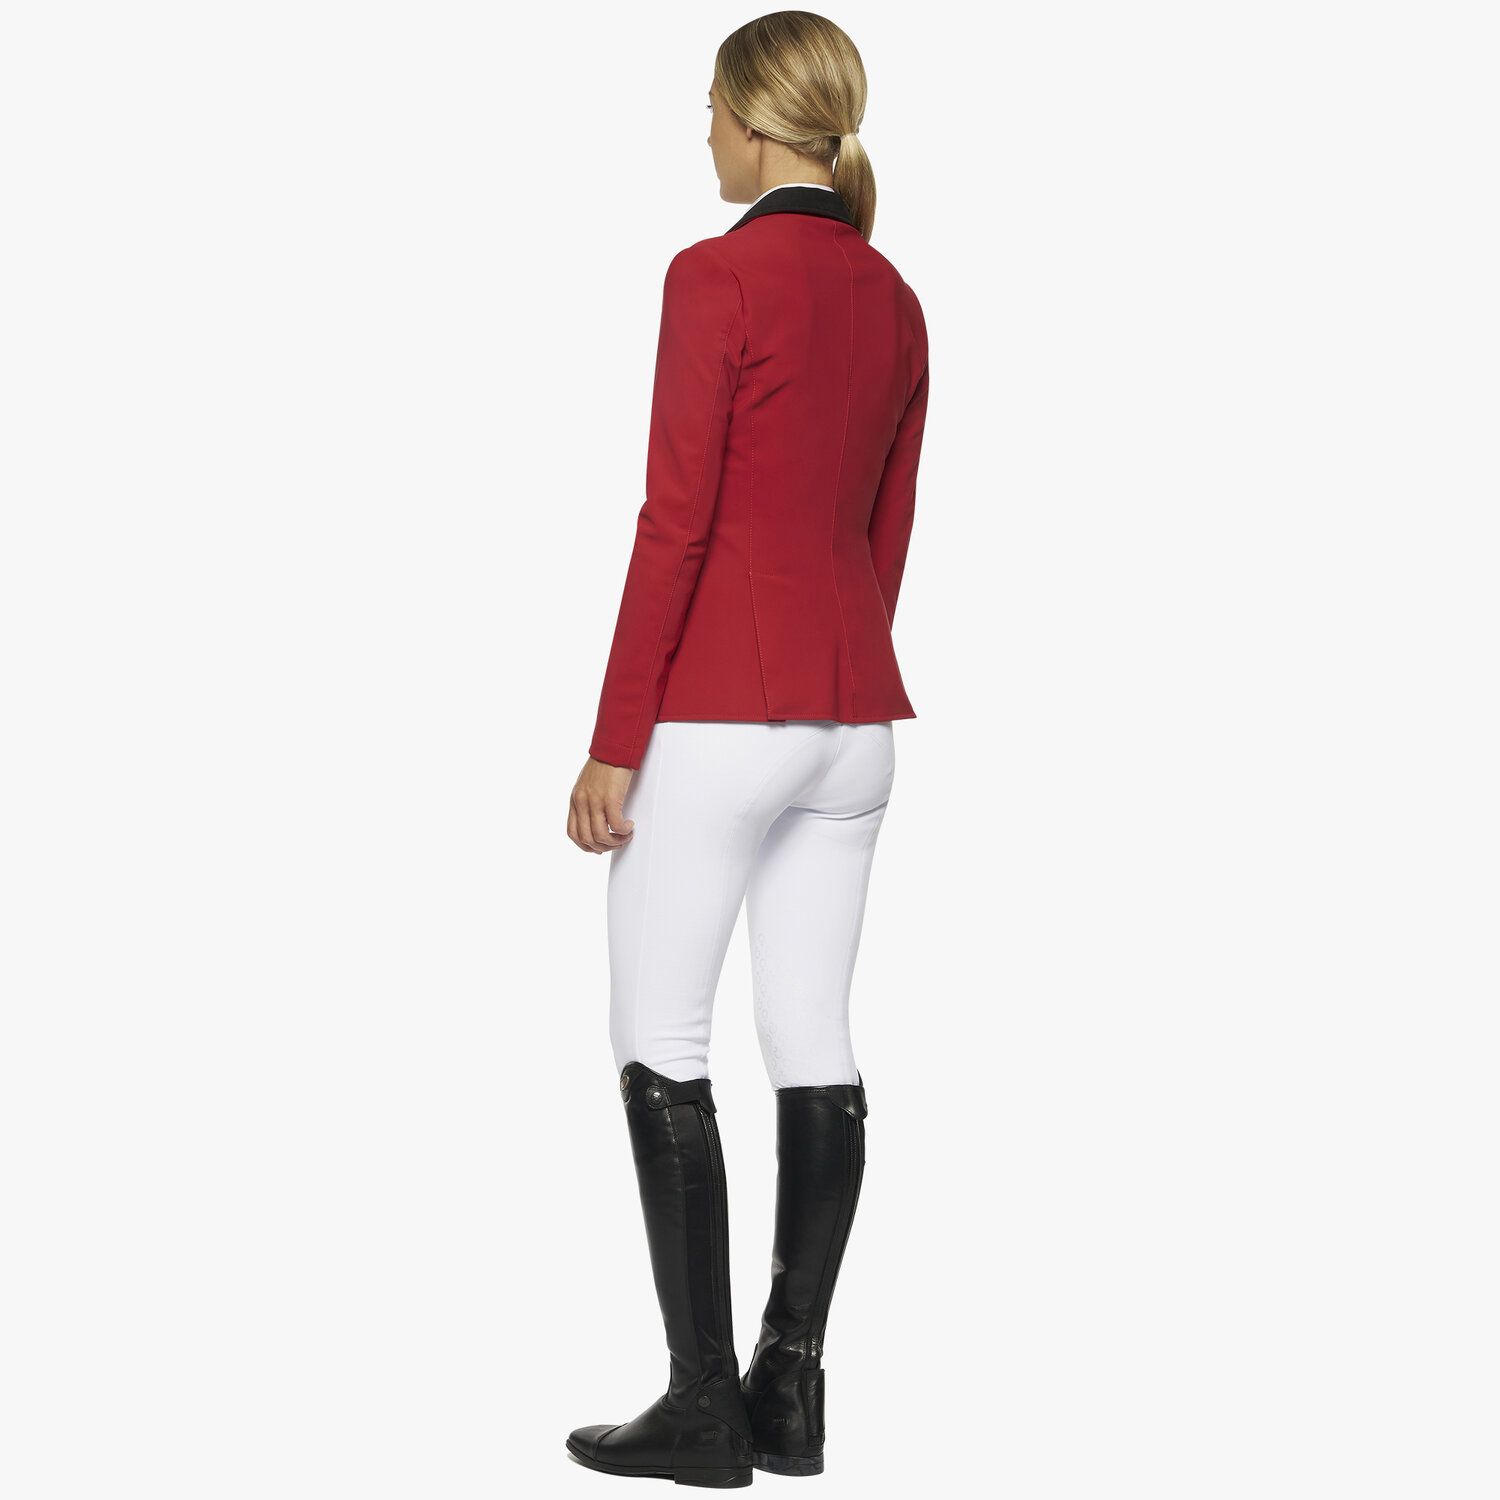 Cavalleria Toscana Women's zip and buttons riding jacket RED-5